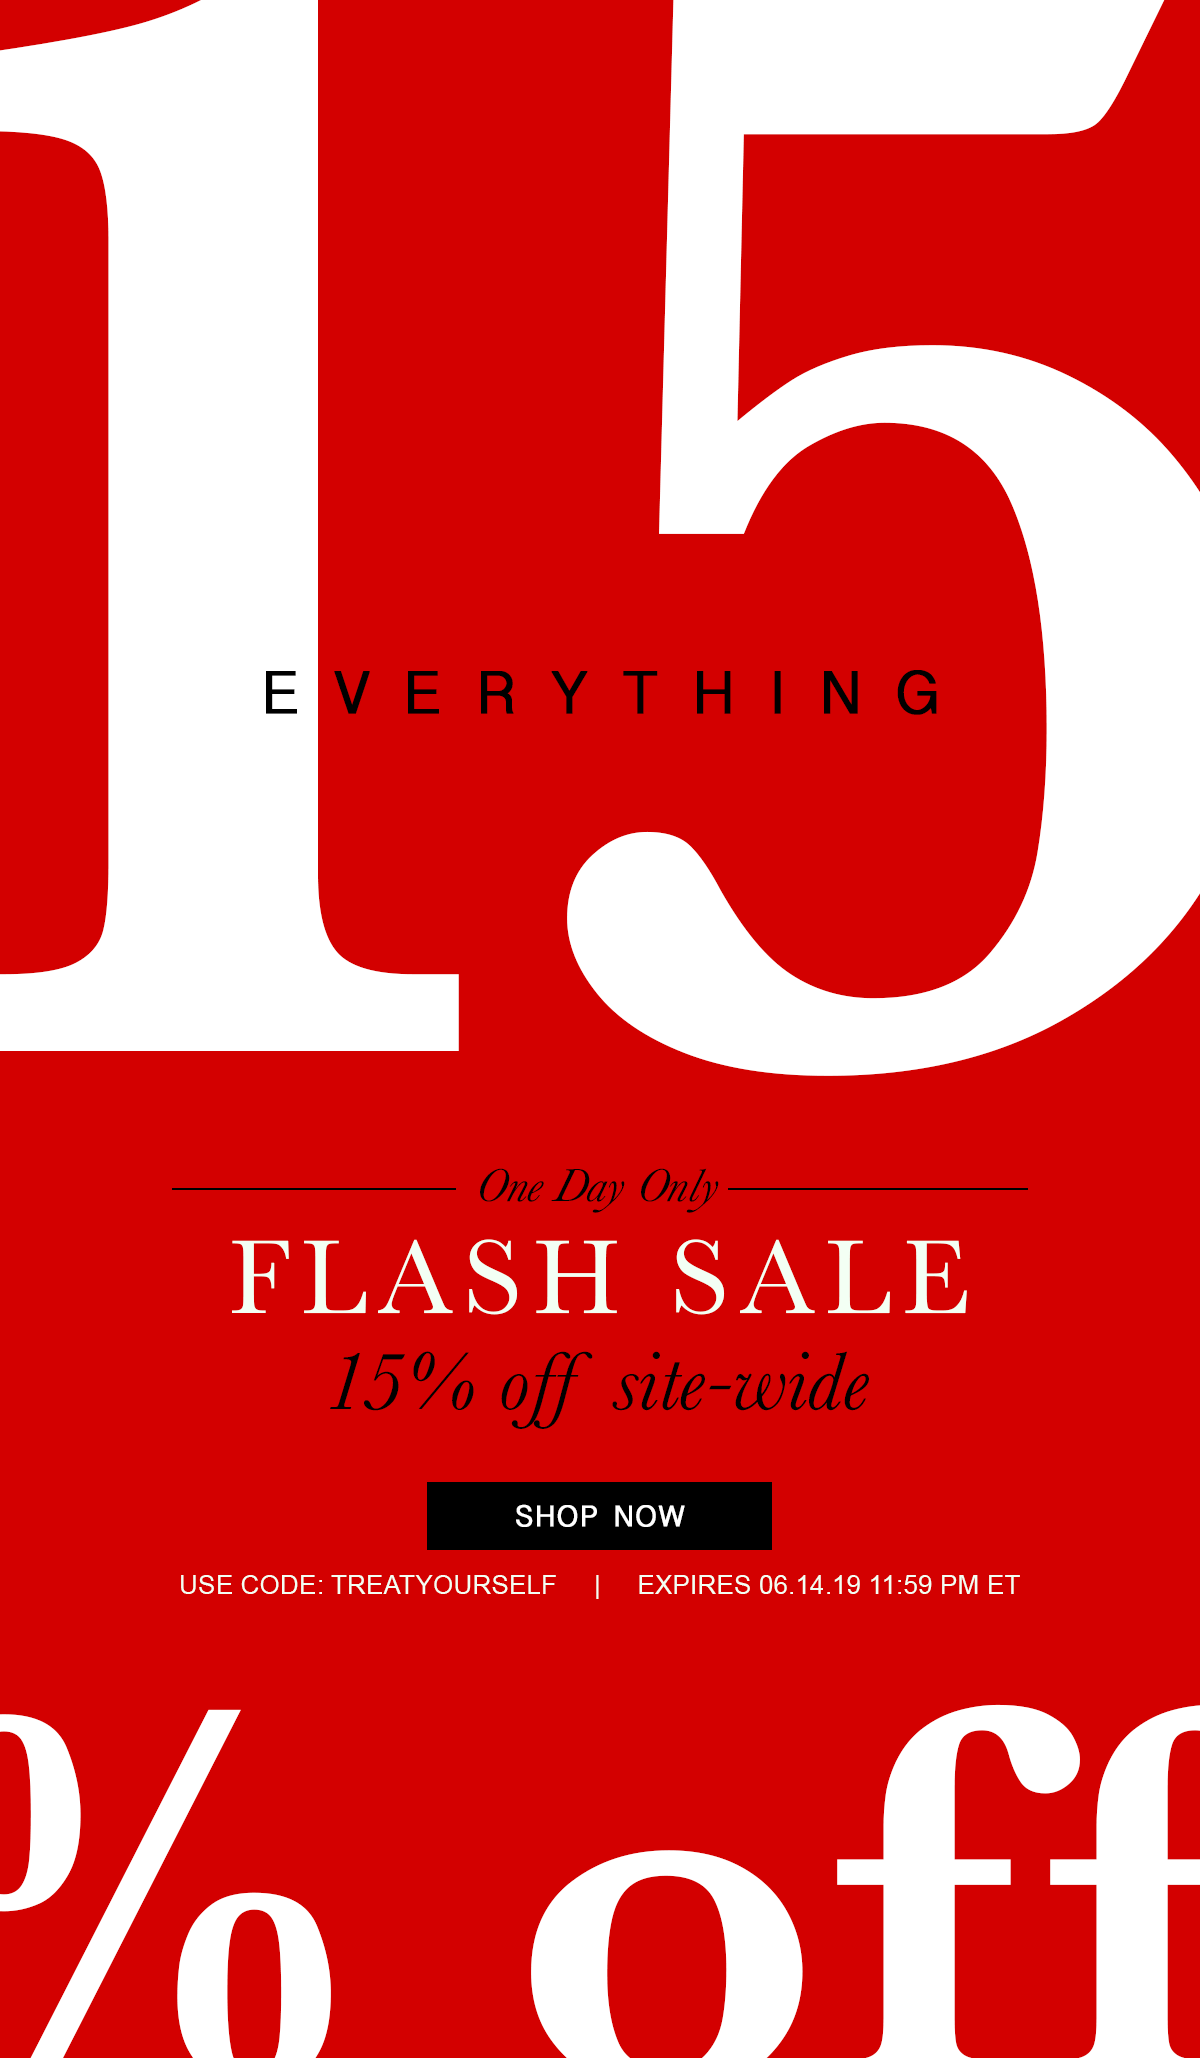 15% off everything. One Day Only FLASH SALE 15% off site-wide Shop Now Use code: TREATYOURSELF | Expires: 06.14.19 11:59PM ET